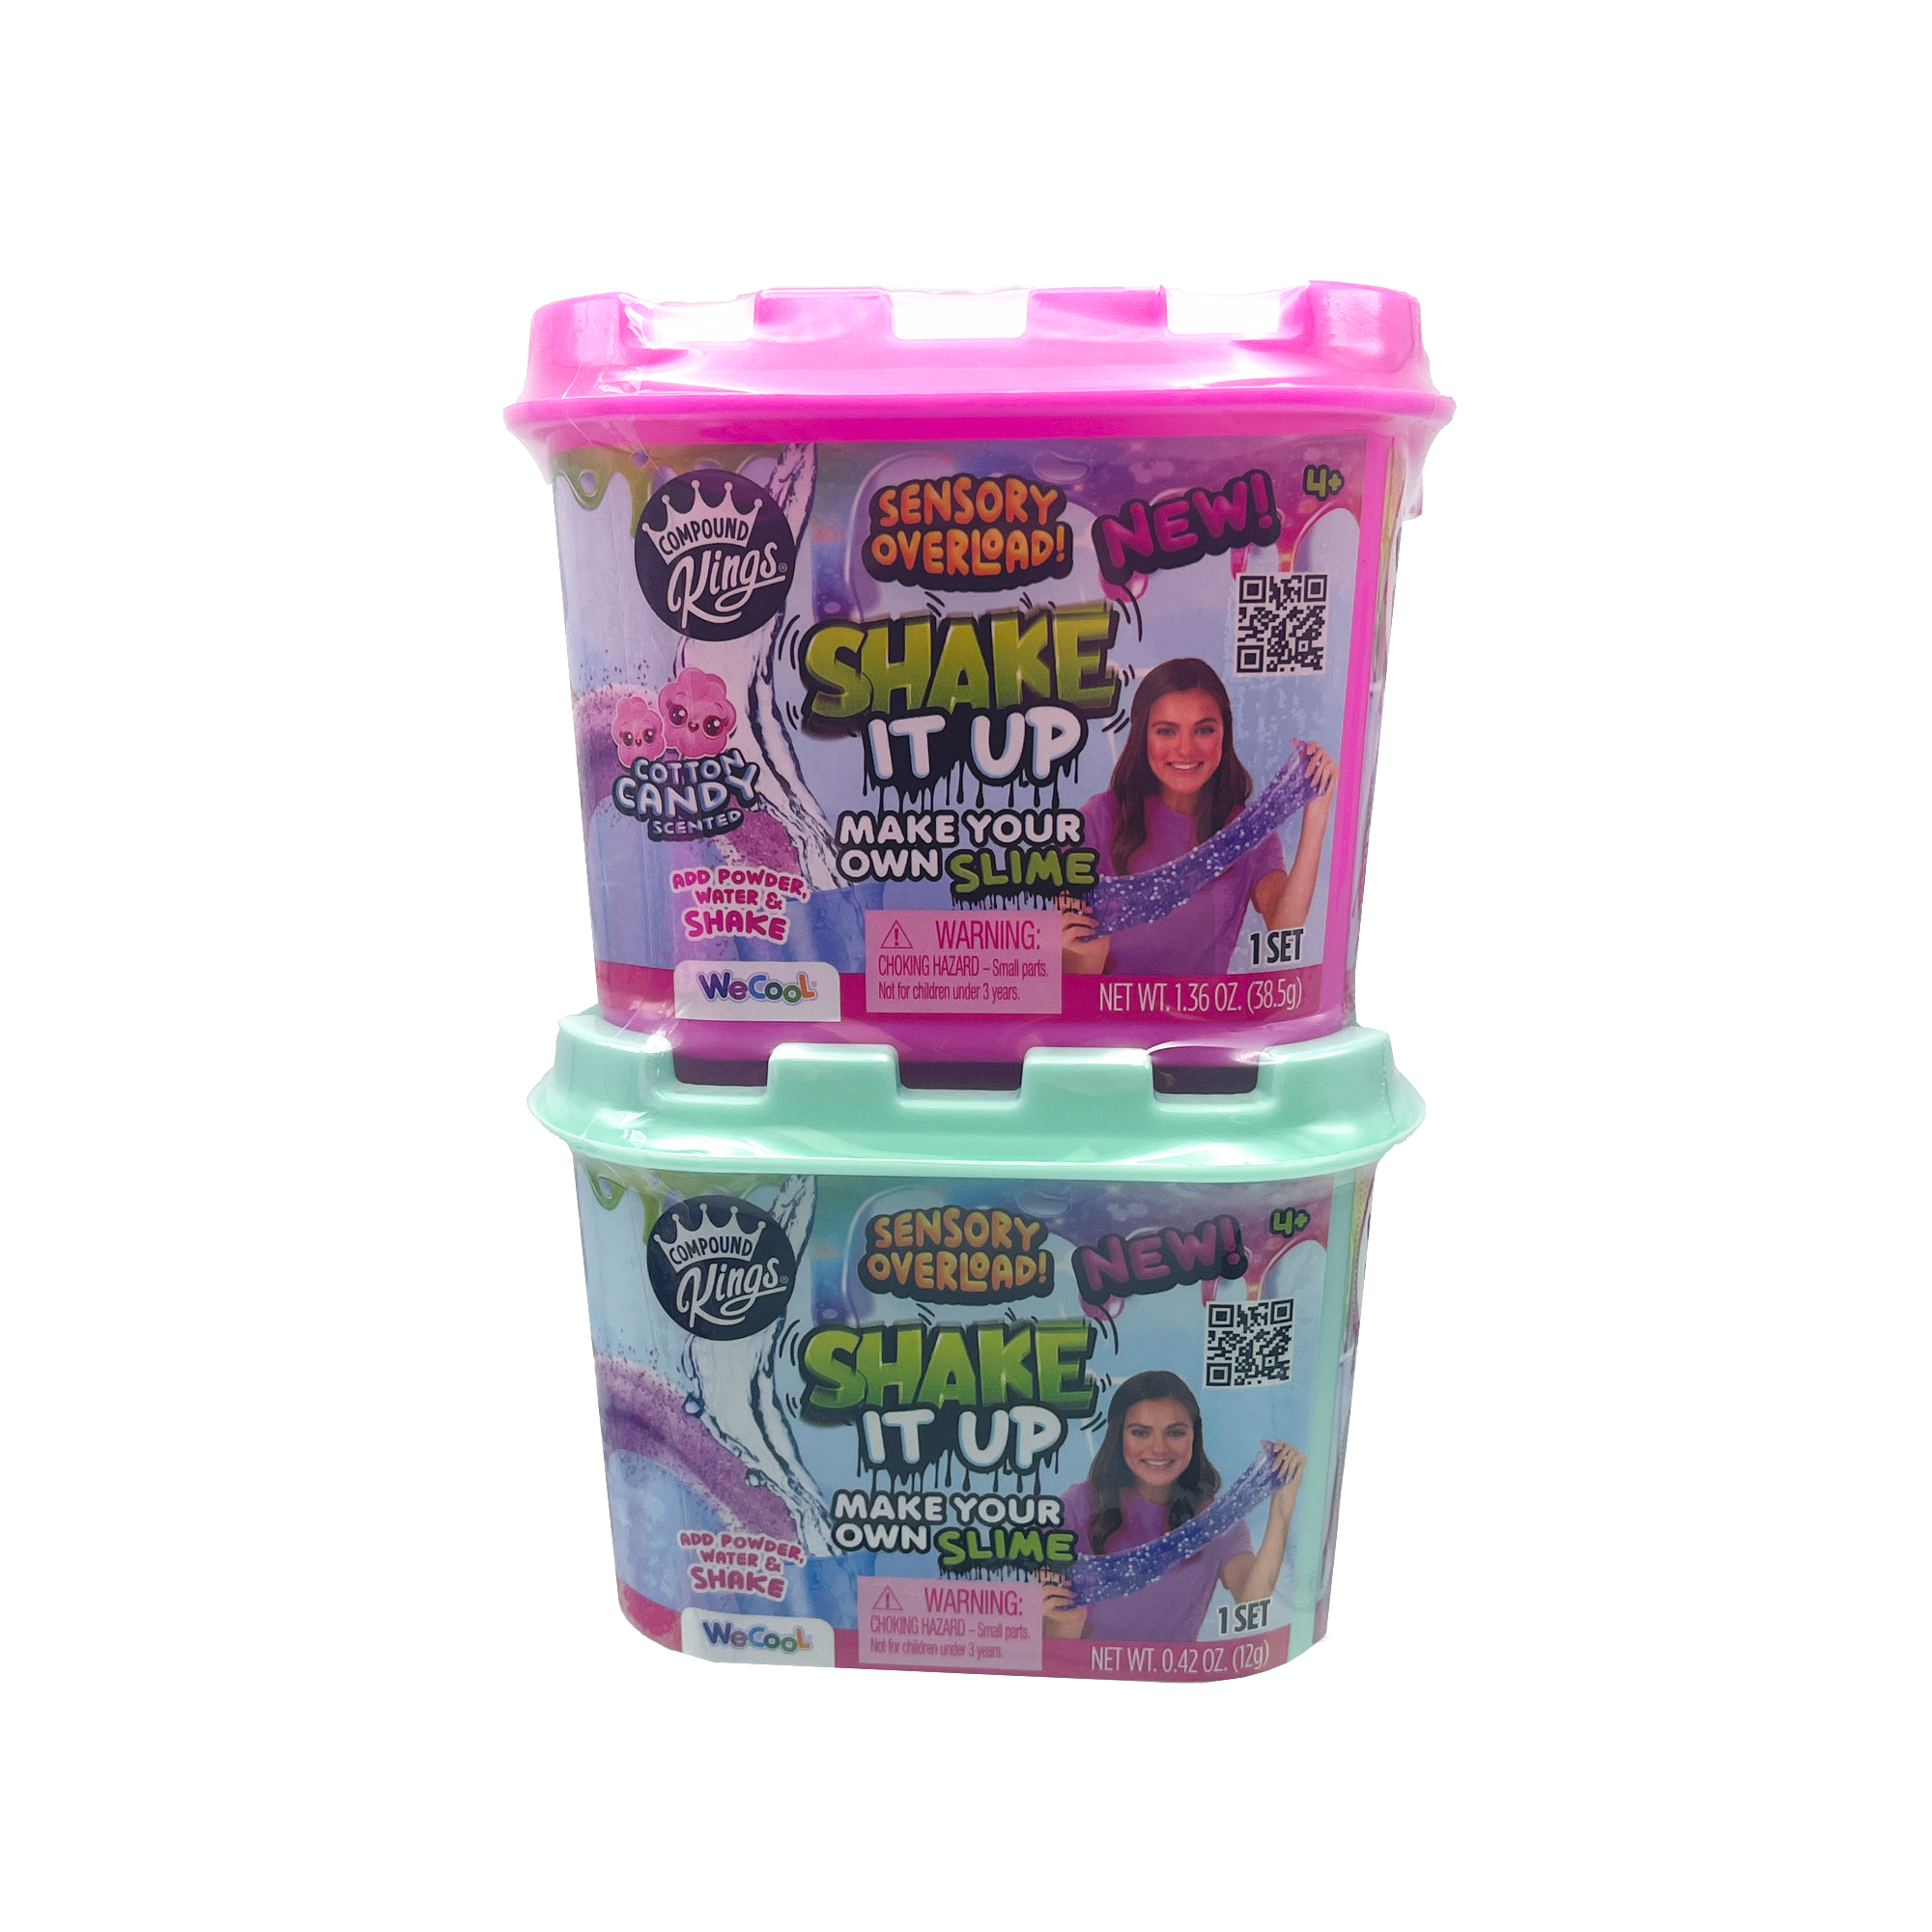 Shake it up DIY slime 2 pack, cotton candy scented pre-made multi color butter included sensory overload. Do it yourself option also with water and powder along with glitter mix-ins and mystery charm